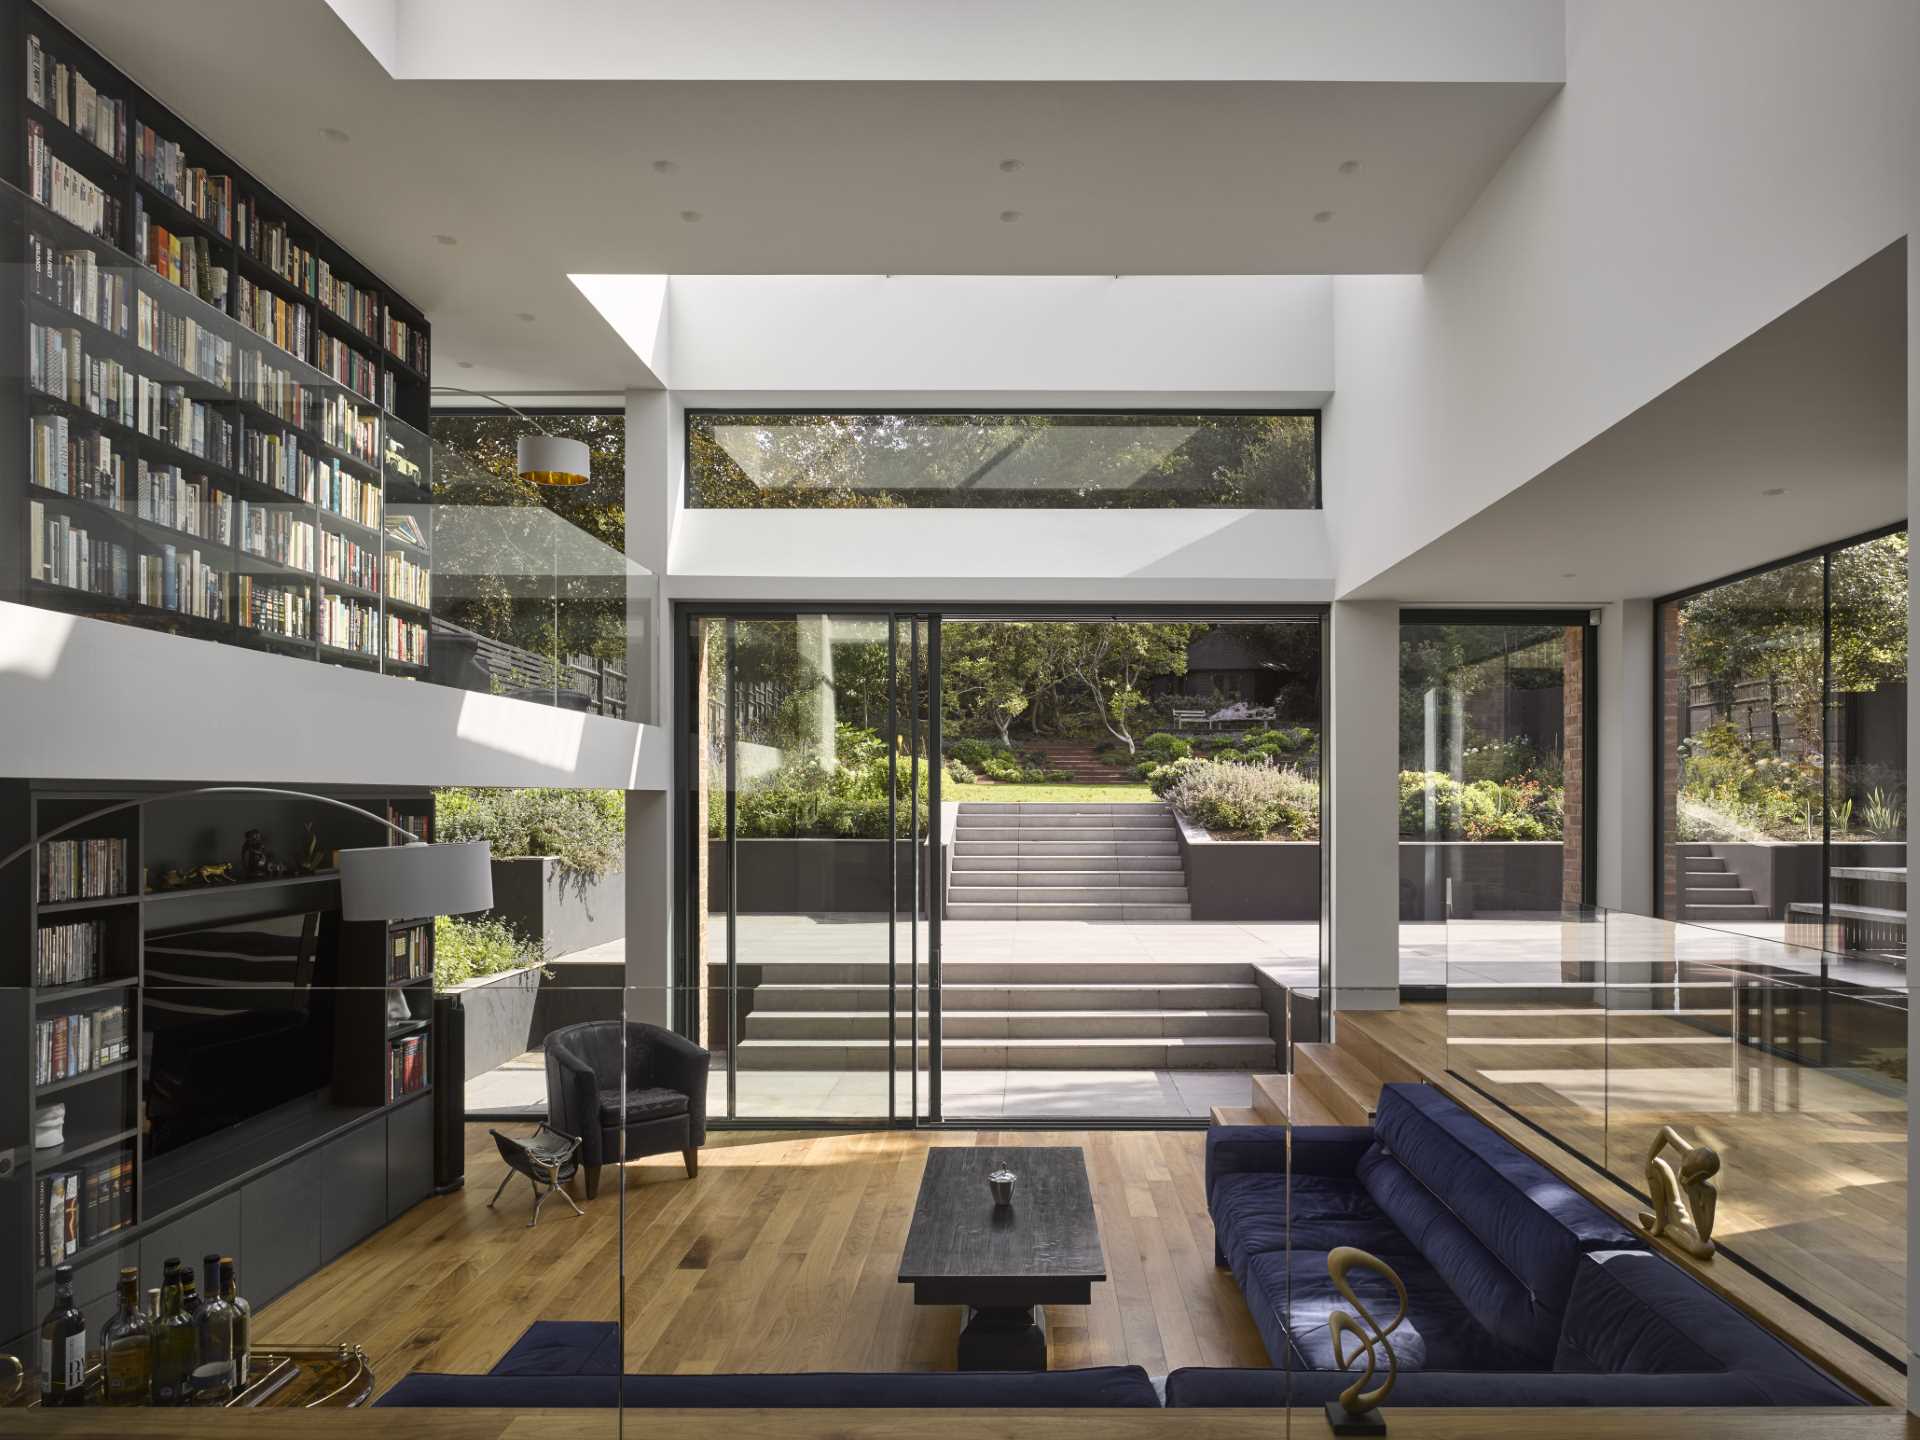 A 1920s British home received a modern rear addition with a sunken living room and mezzanine reading level.